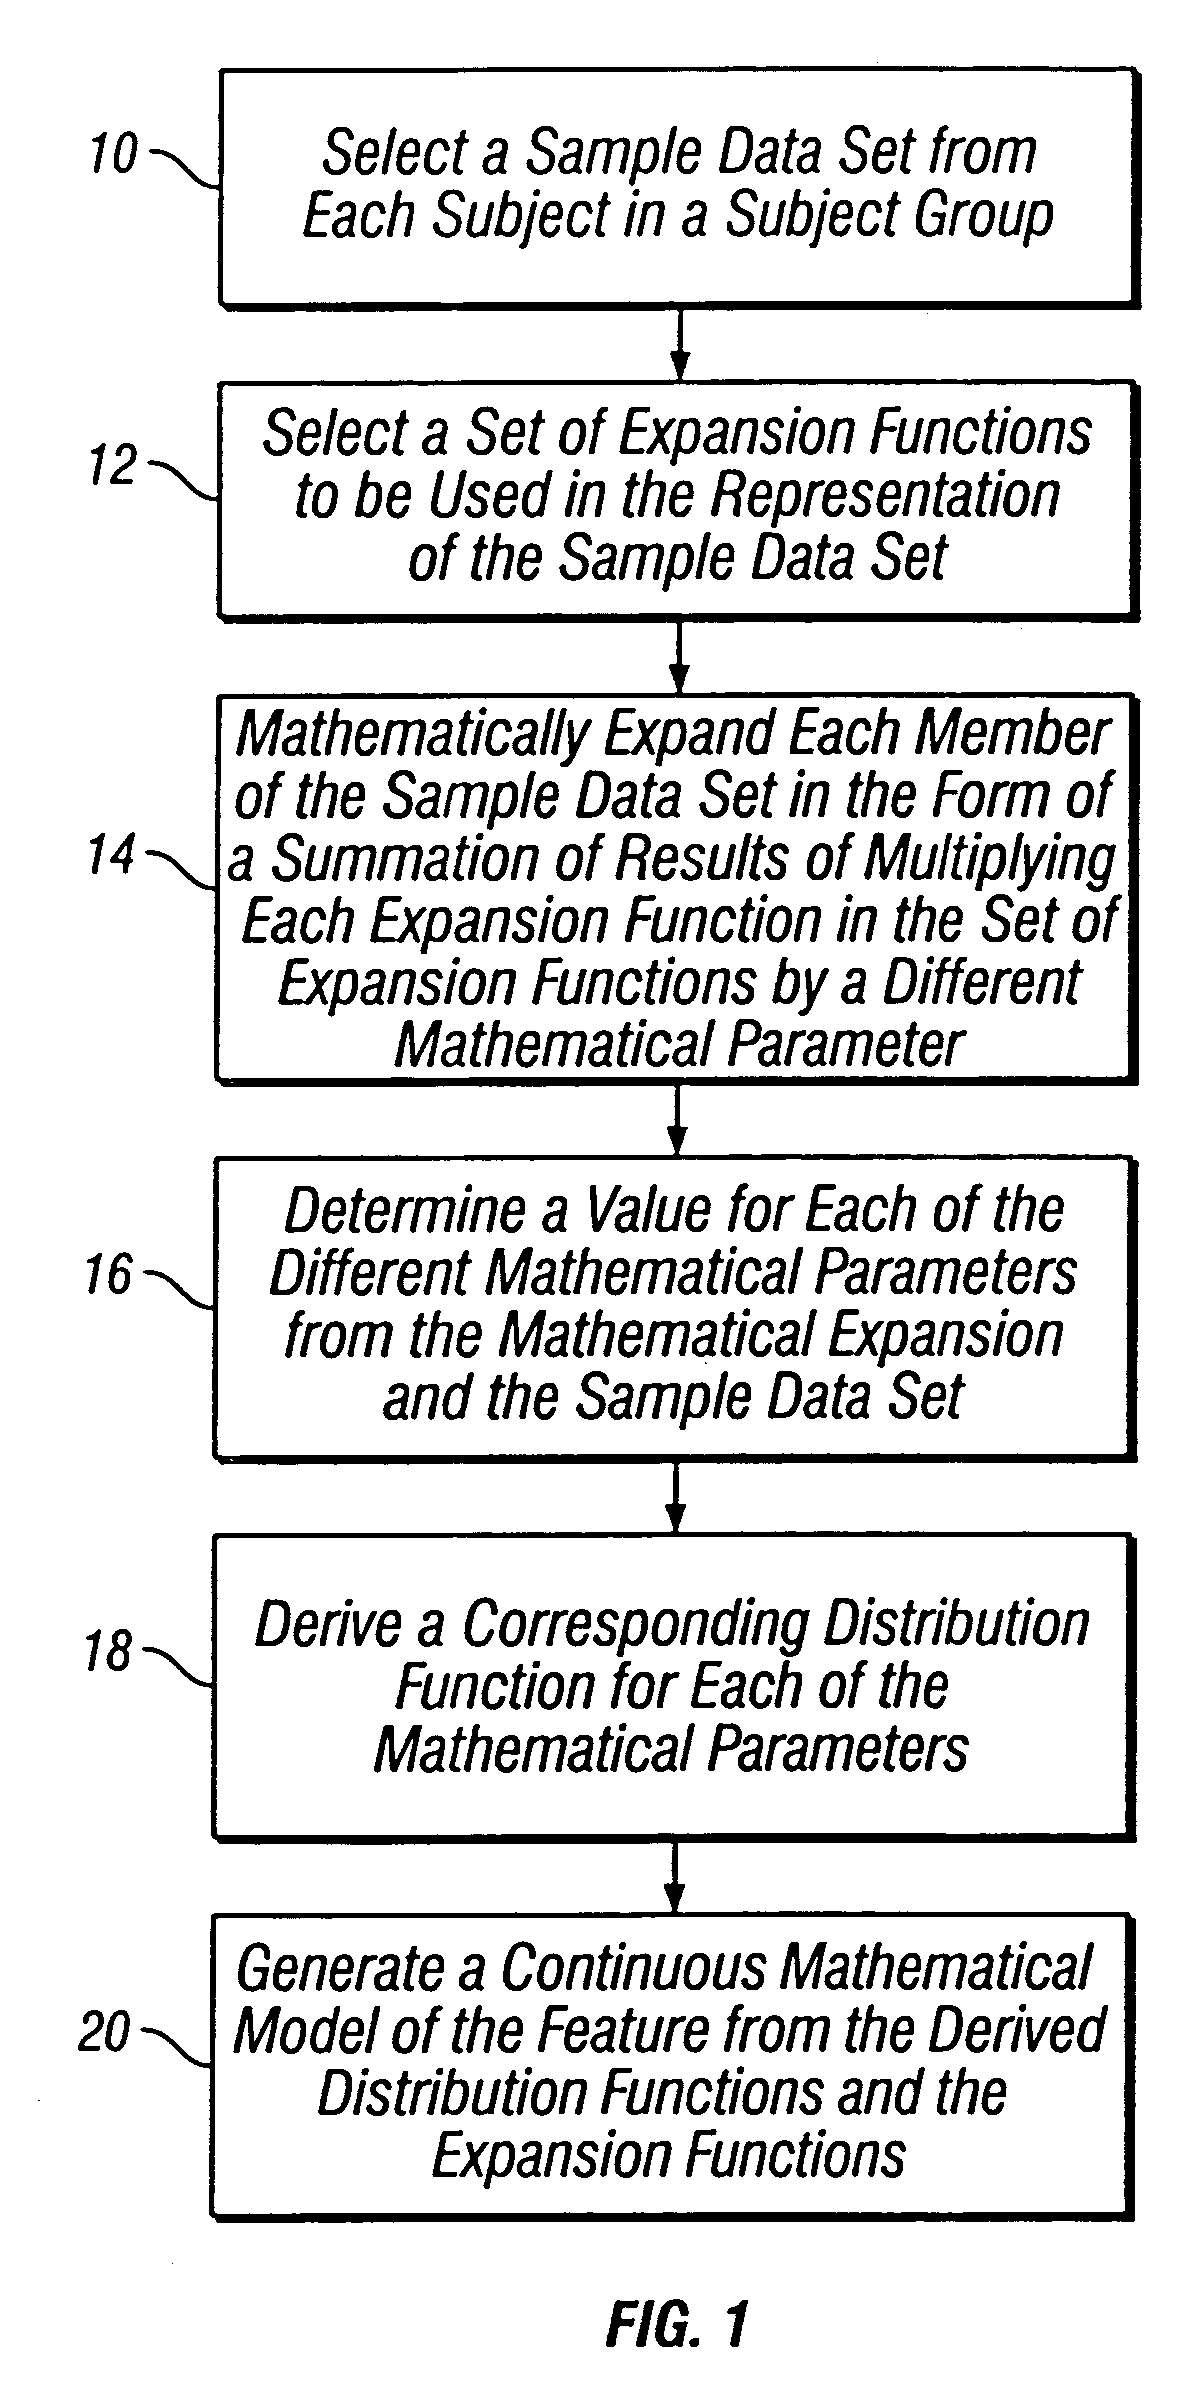 Generation of continuous mathematical model for common features of a subject group